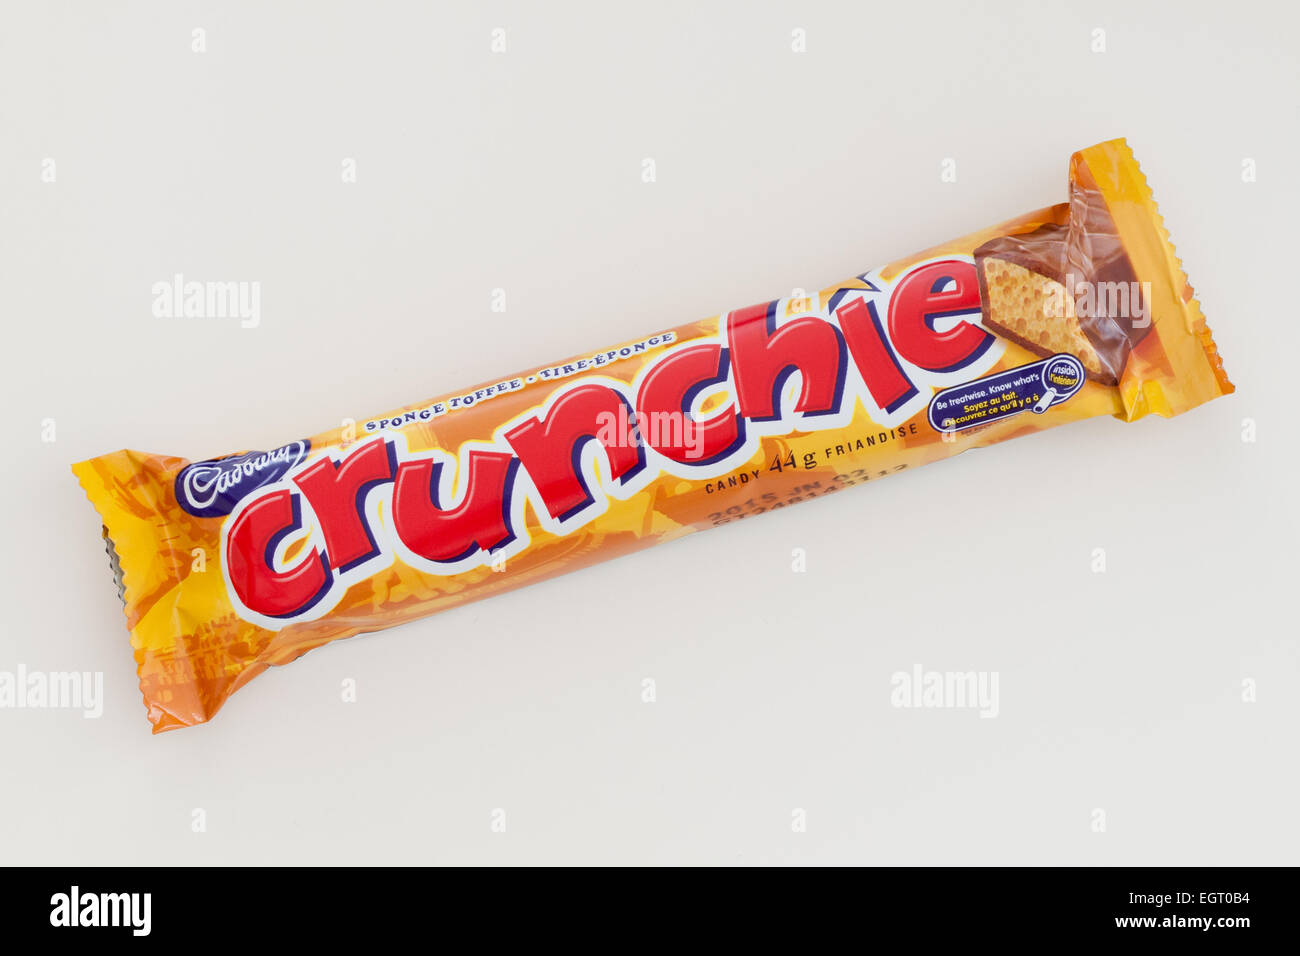 A Crunchie chocolate bar, which features a honeycomb toffee sugar centre.  Produced by Cadbury. Stock Photo